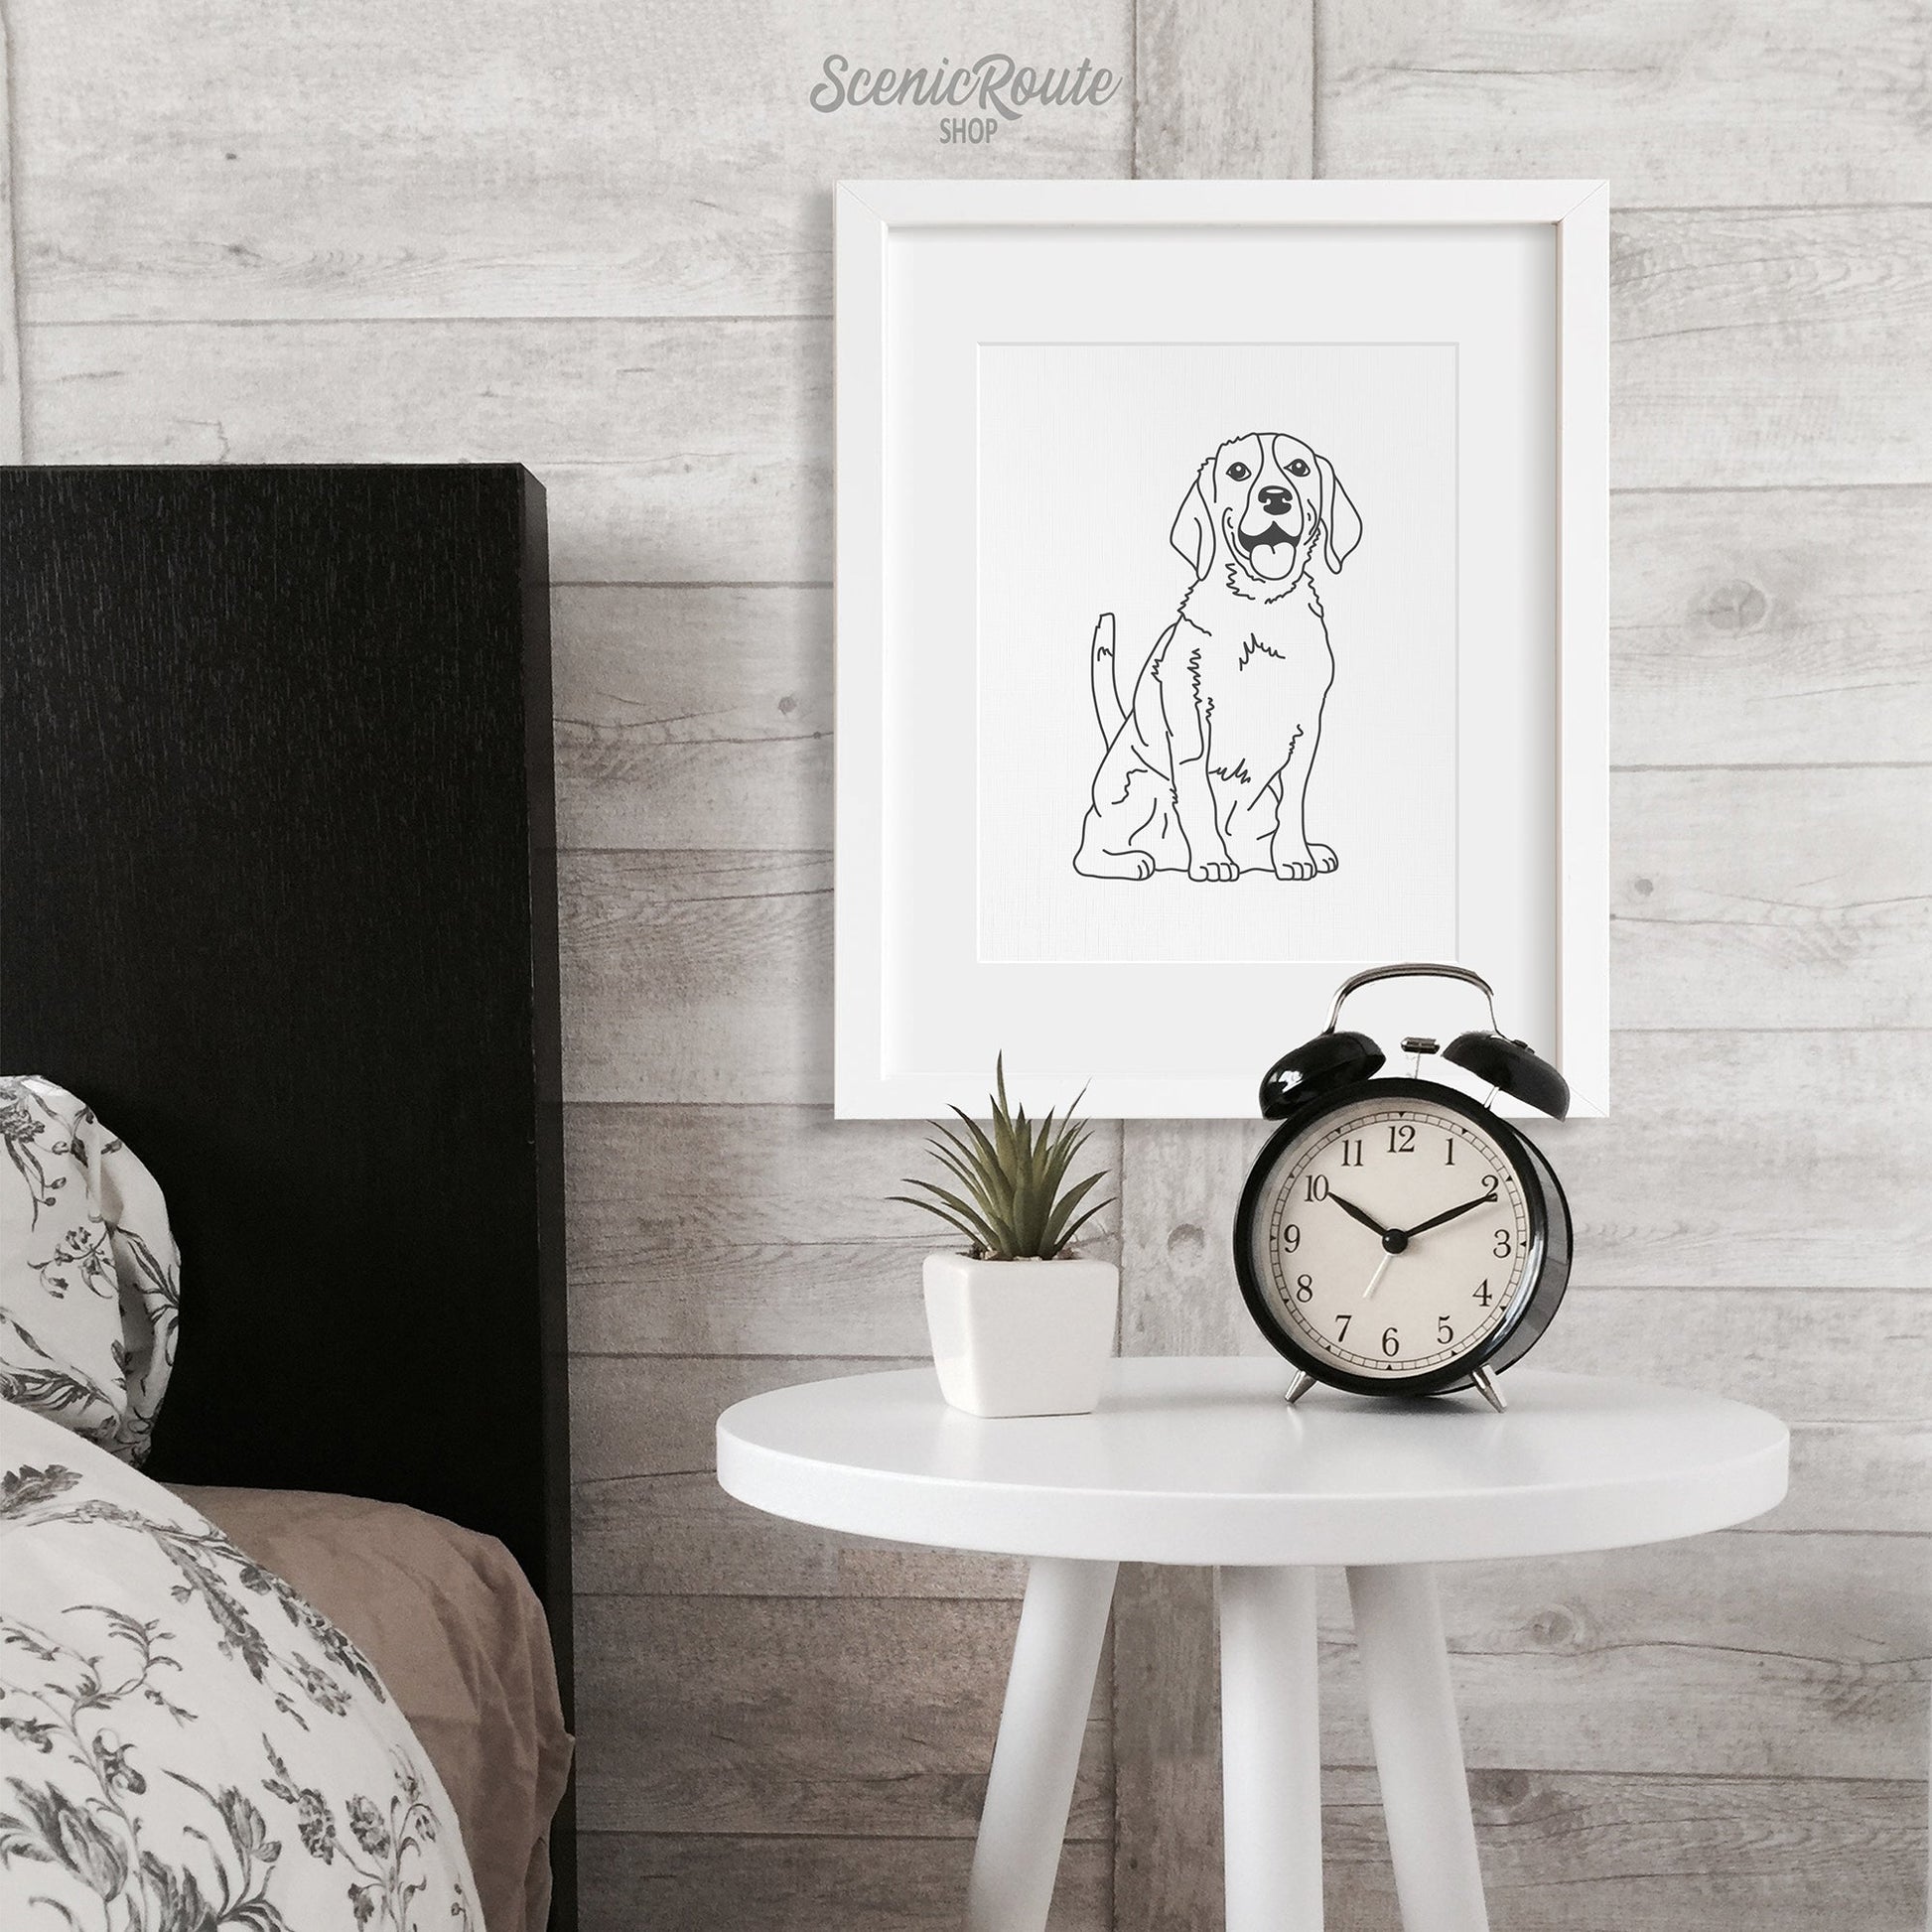 A framed line drawing of a Beagle dog hung above a table next to a bed